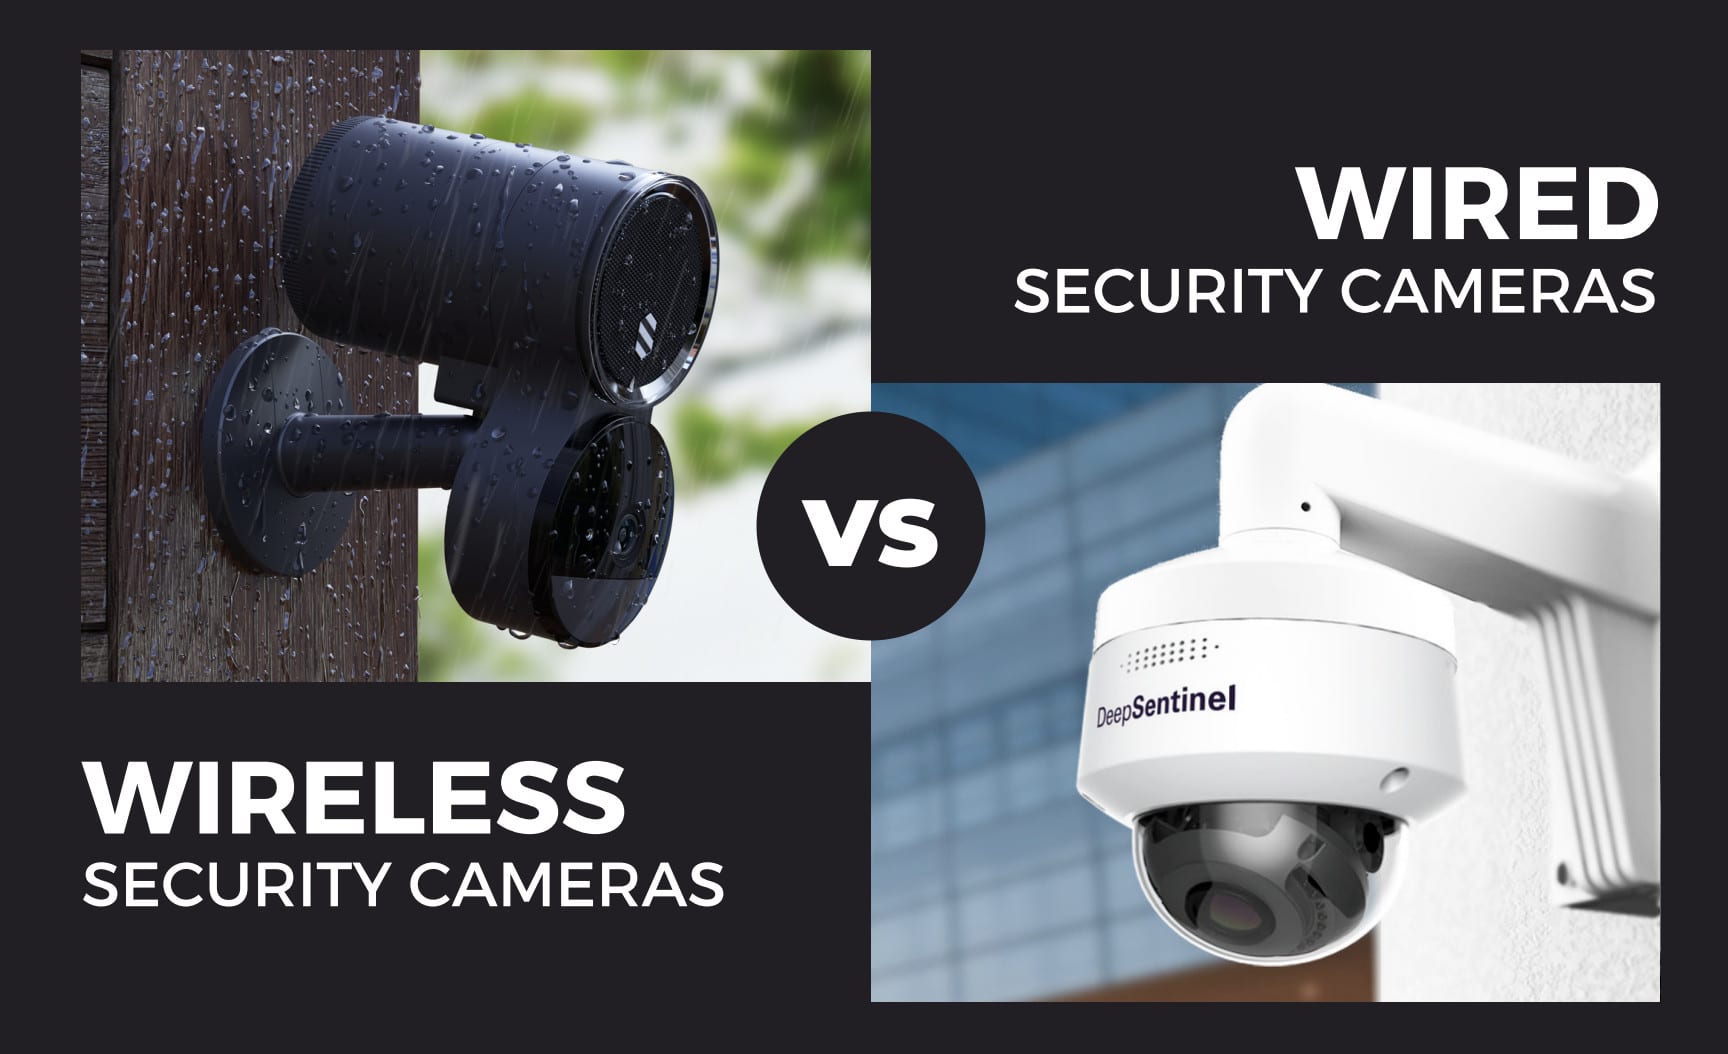 Comparison Between Wired vs Wireless Security Cameras